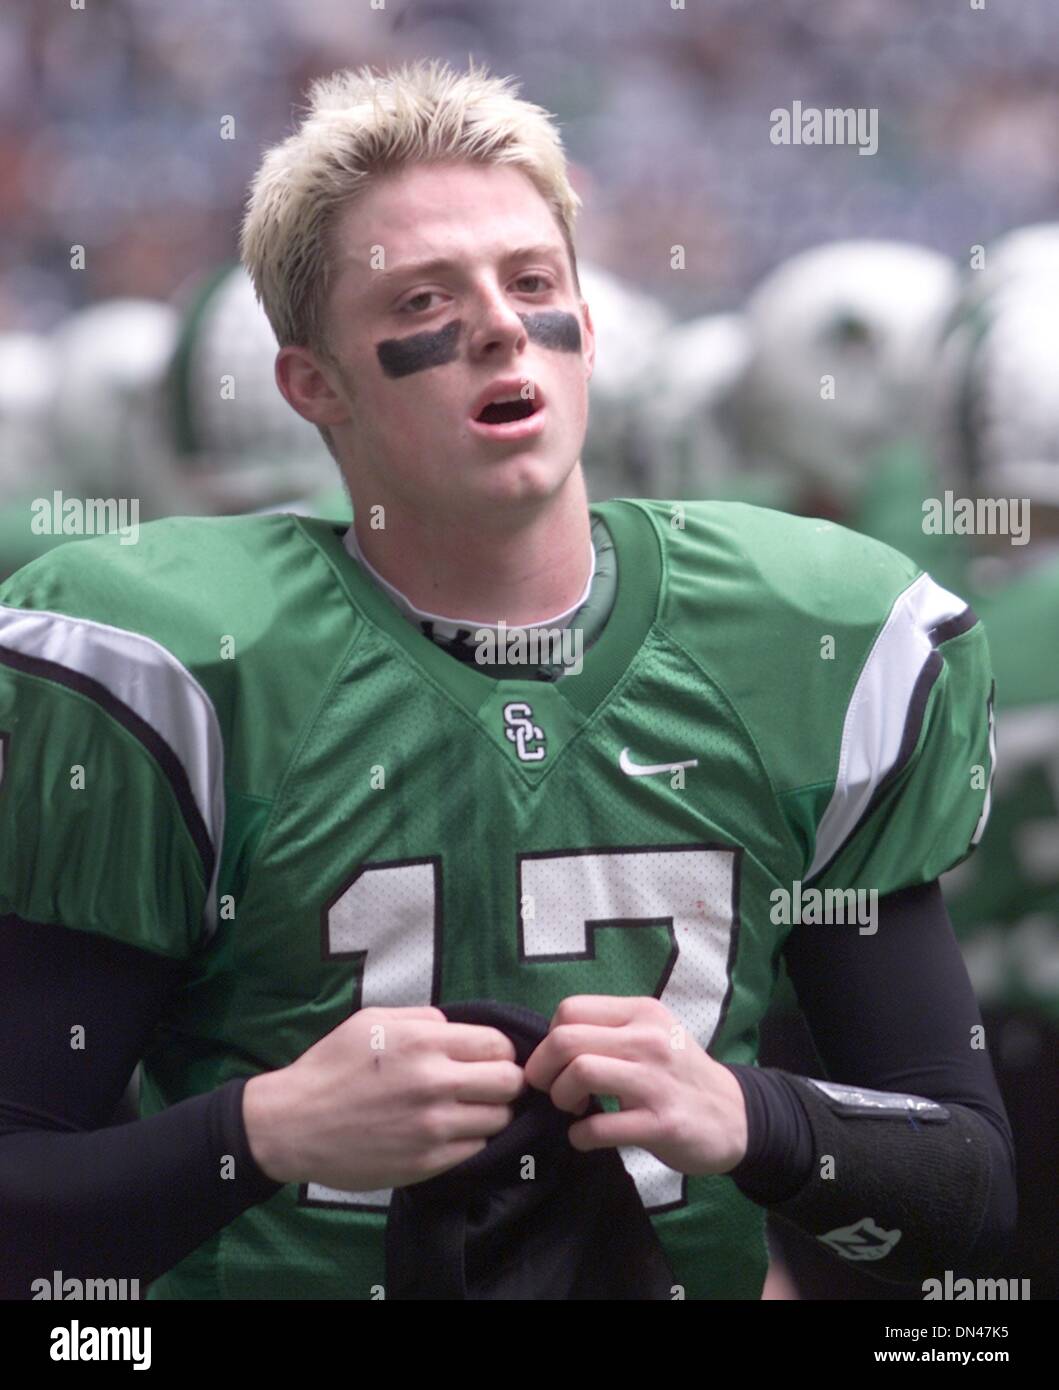 Dec 17, 2005 - Irving, Texas, USA - Quarterback GREG MCELROY takes a break during the Texas UIL 5A Division II title game against Katy his senior year as quarterback at Southlake Carroll High School.  (Credit Image: Â© Robert Hughes/ZUMA Press) Stock Photo